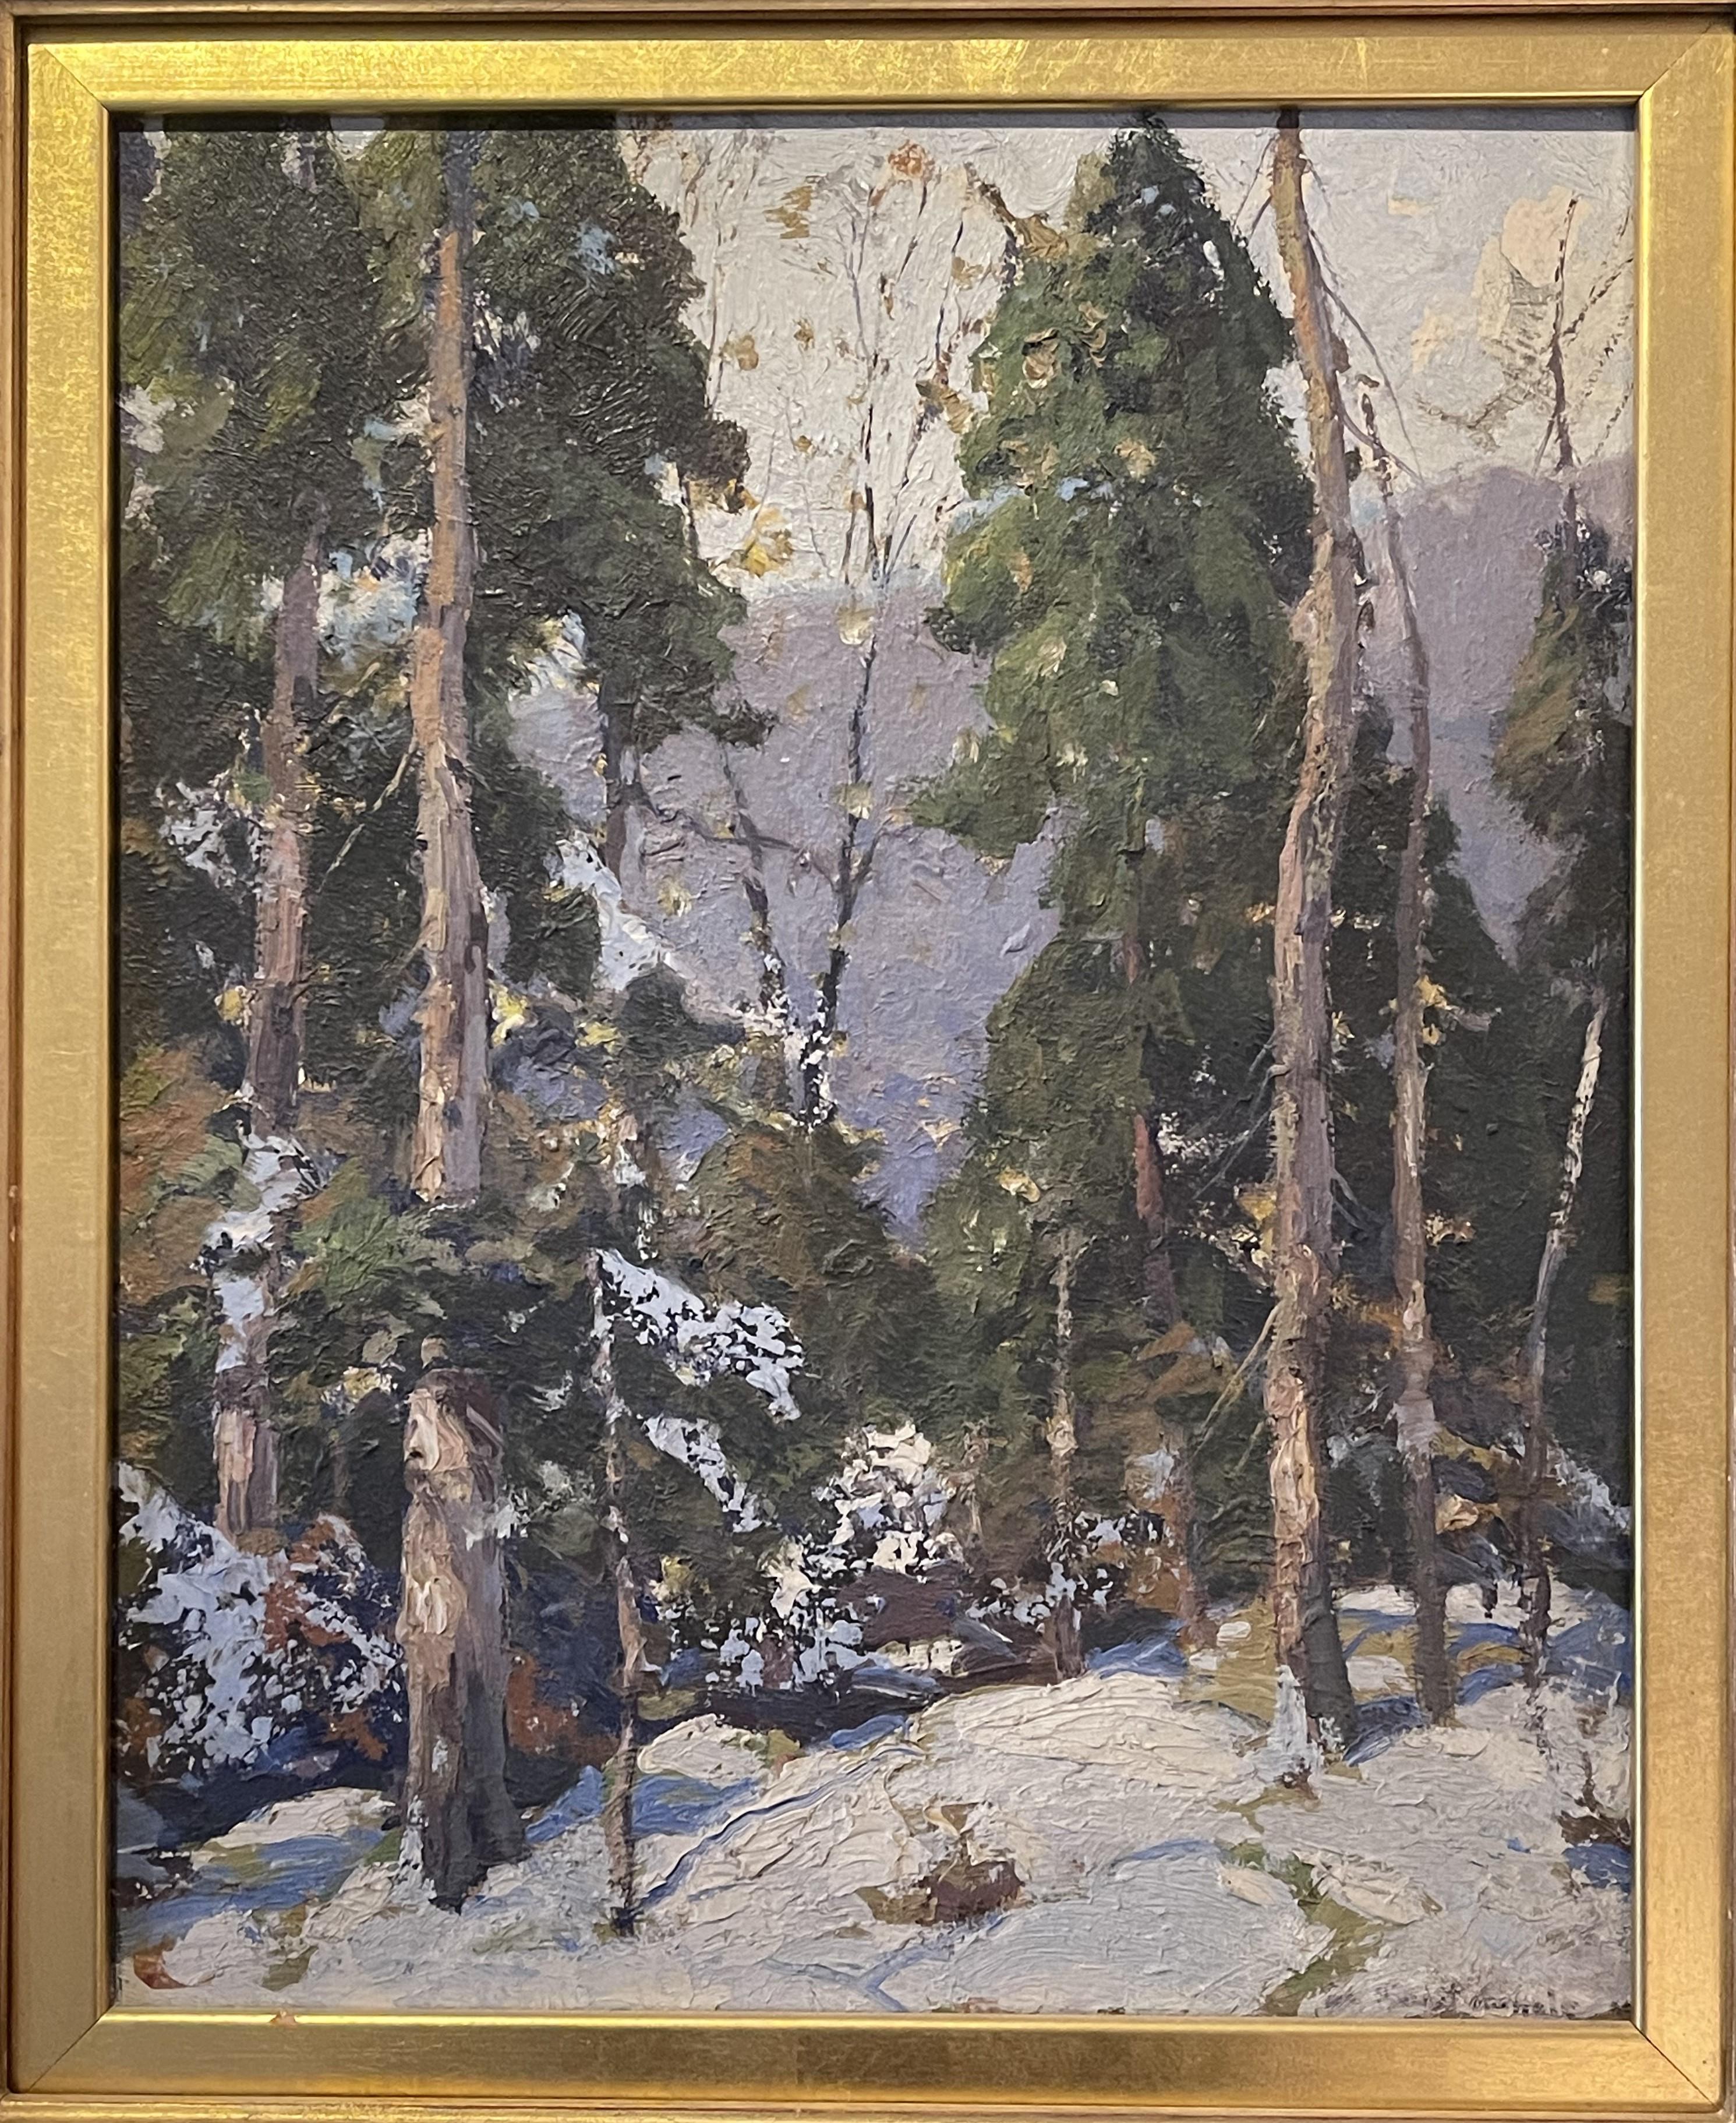 Winter Landscape
oil/board
13 x 16 image 19. 5 x 22.5 framed 
Here is a beautiful winter snow scene oil painting on board by Hobart Nichols signed lower right.  The painting is in good condition and the frame shows age with wear, chips, etc. and has